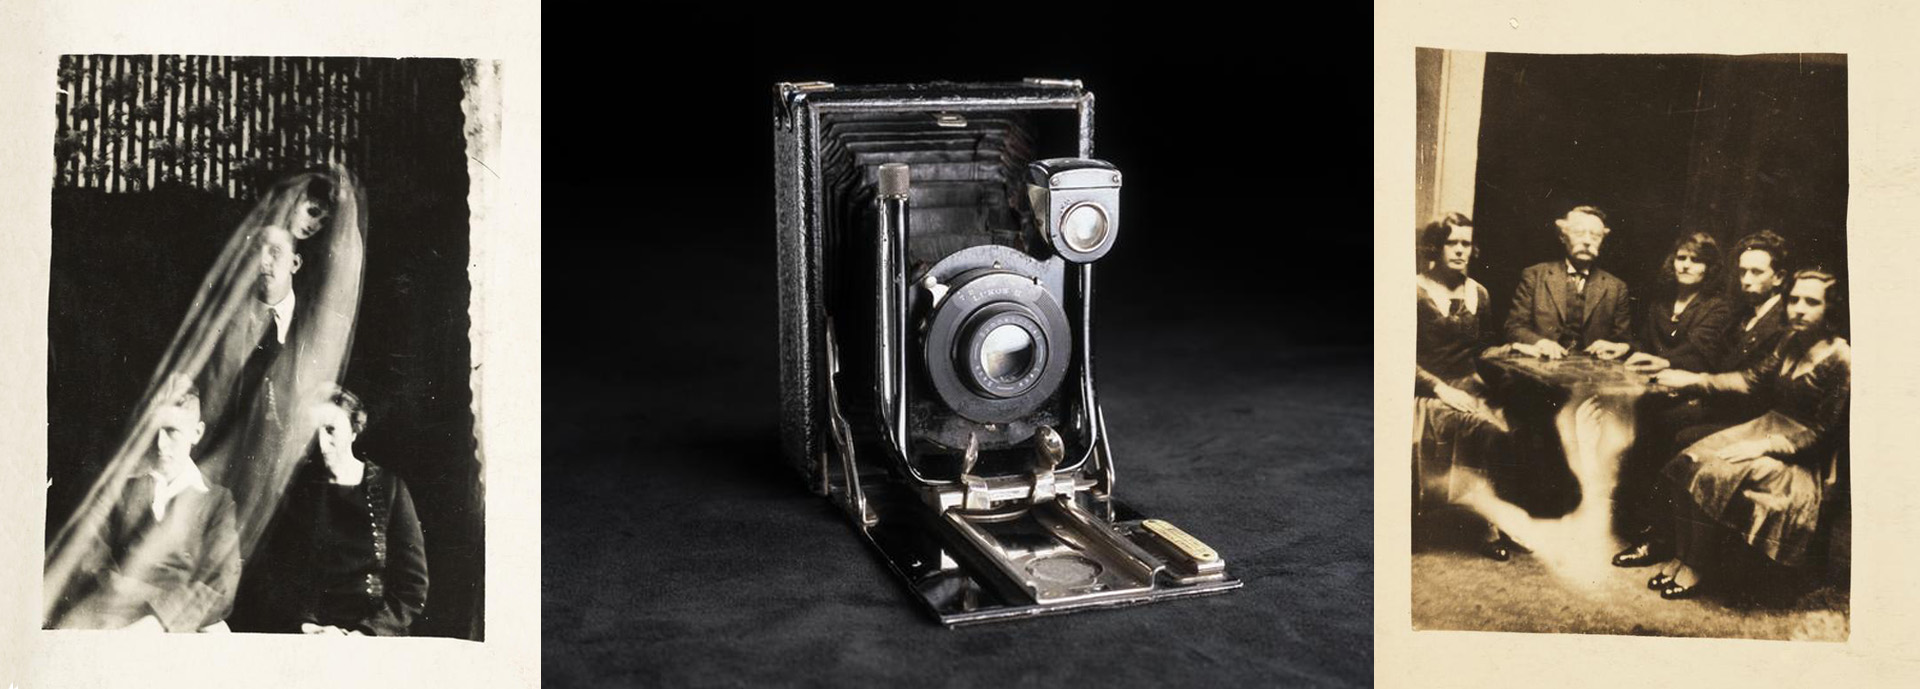 archive photos of old camera and people